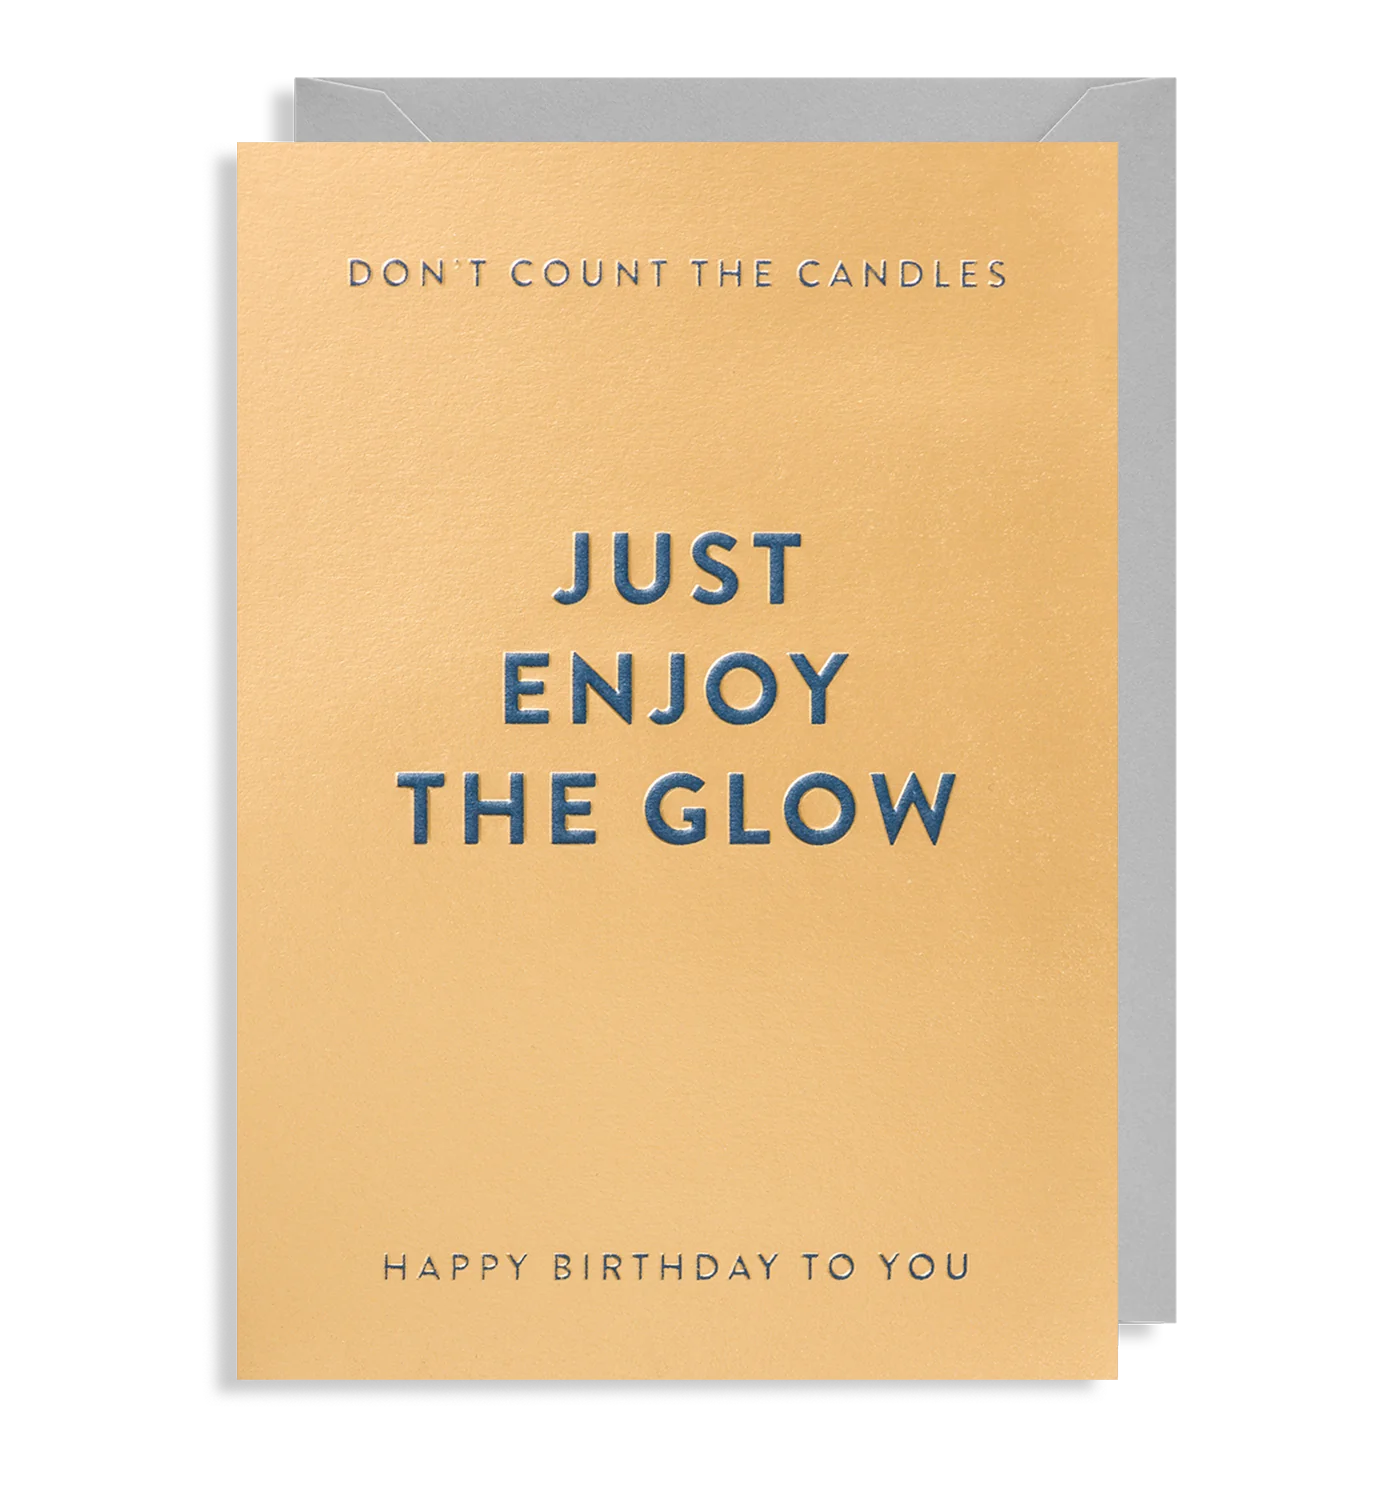 Don't Count The Candles, Just Enjoy The Glow Birthday Card